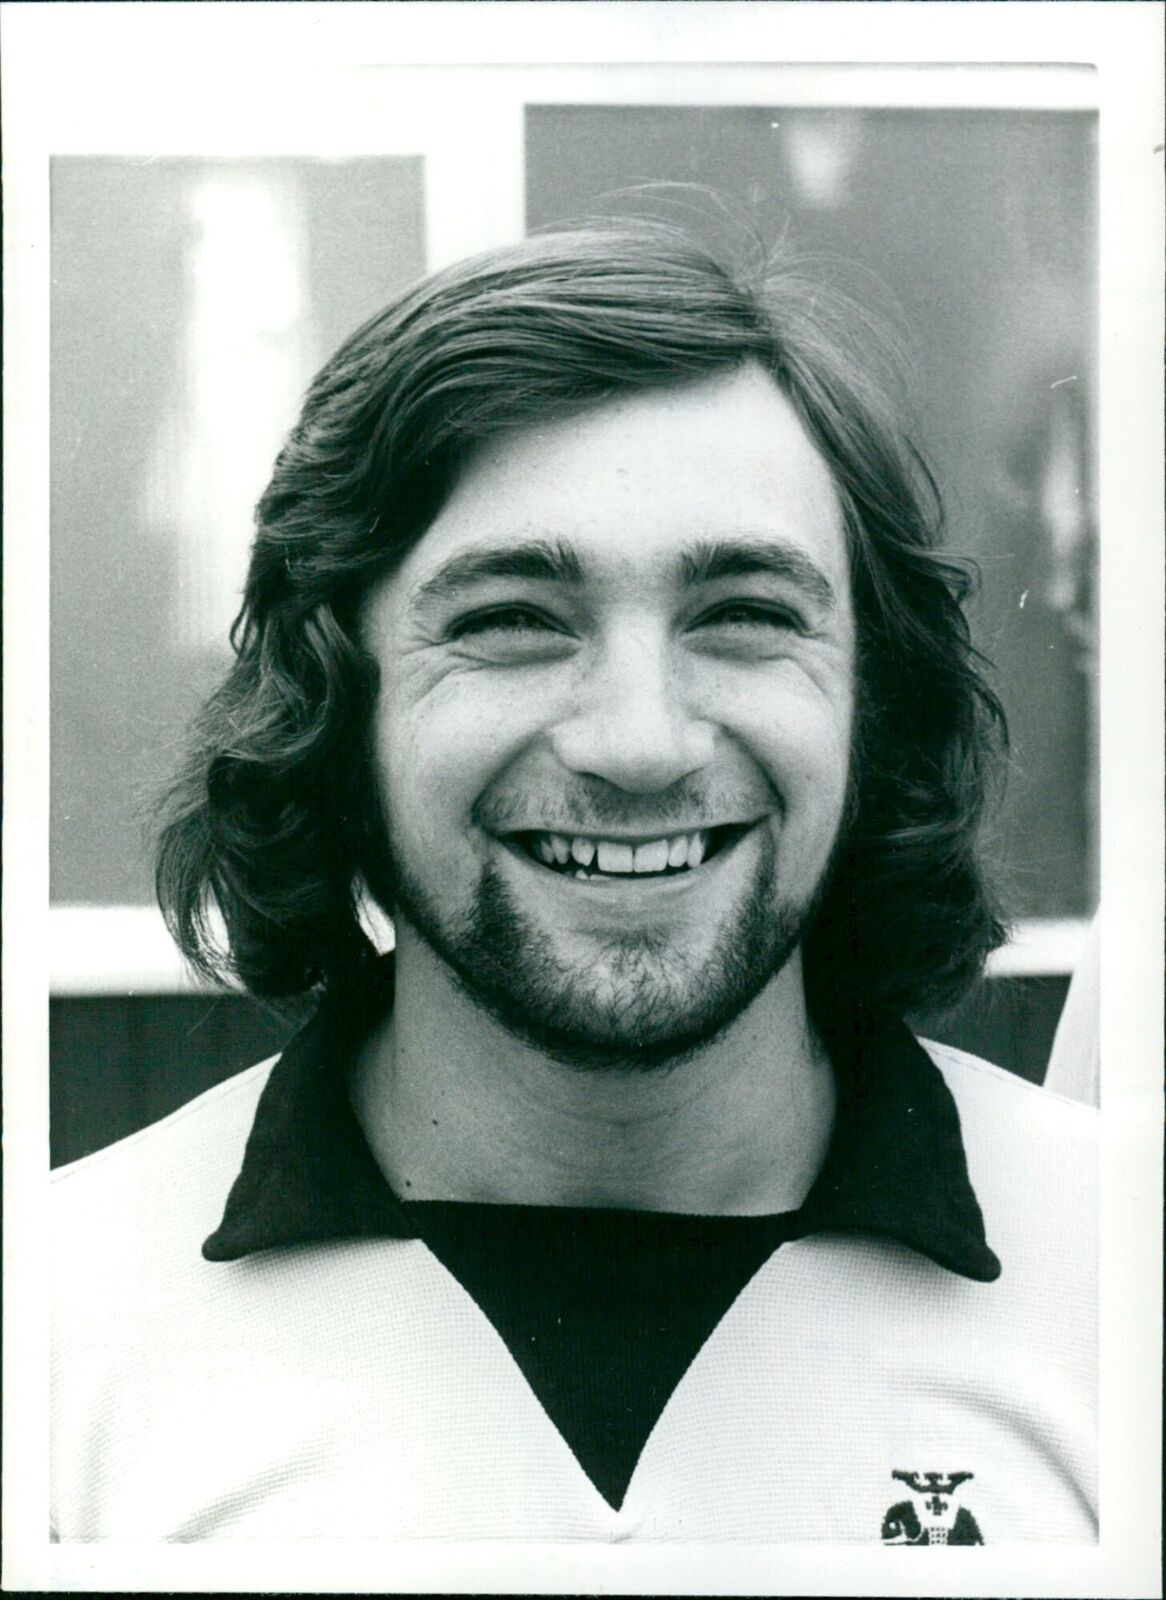 1973 - GREEN ALAN FOOTBALL COVENTRY JULY, LONDO... - Vintage Photograph 3890358